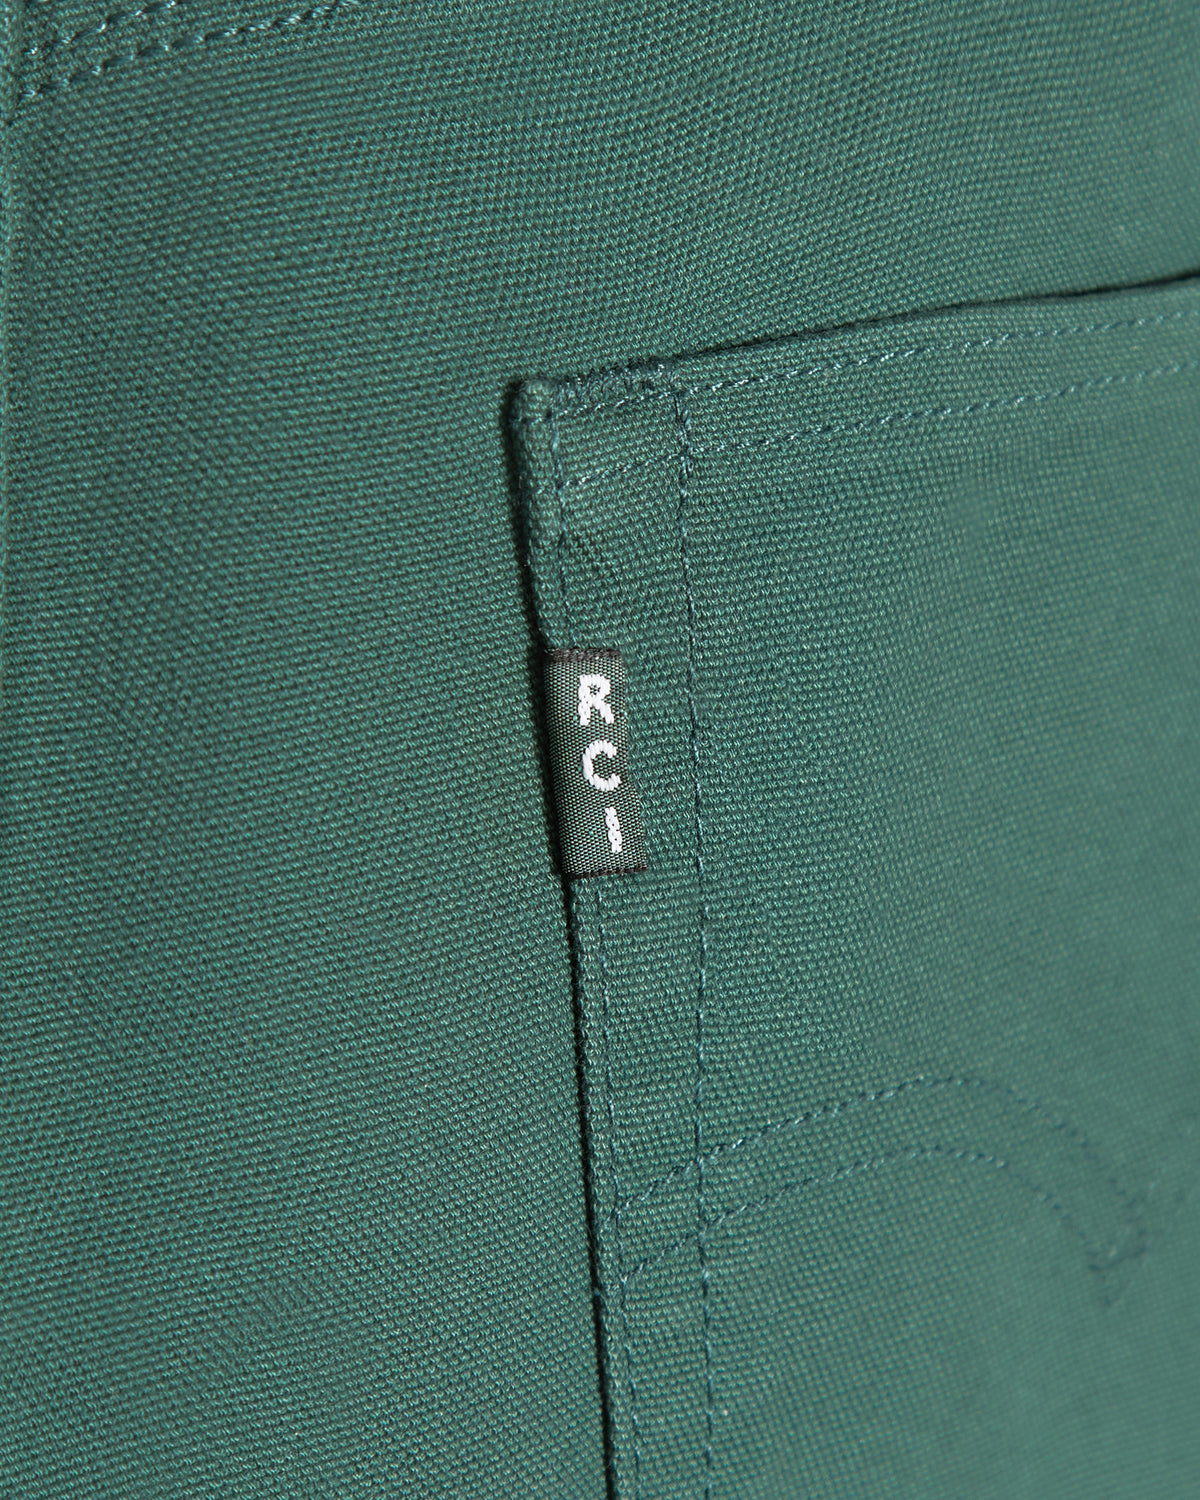 RCI x Levi's Straight Fit Duck Canvas Pant in Forest Green